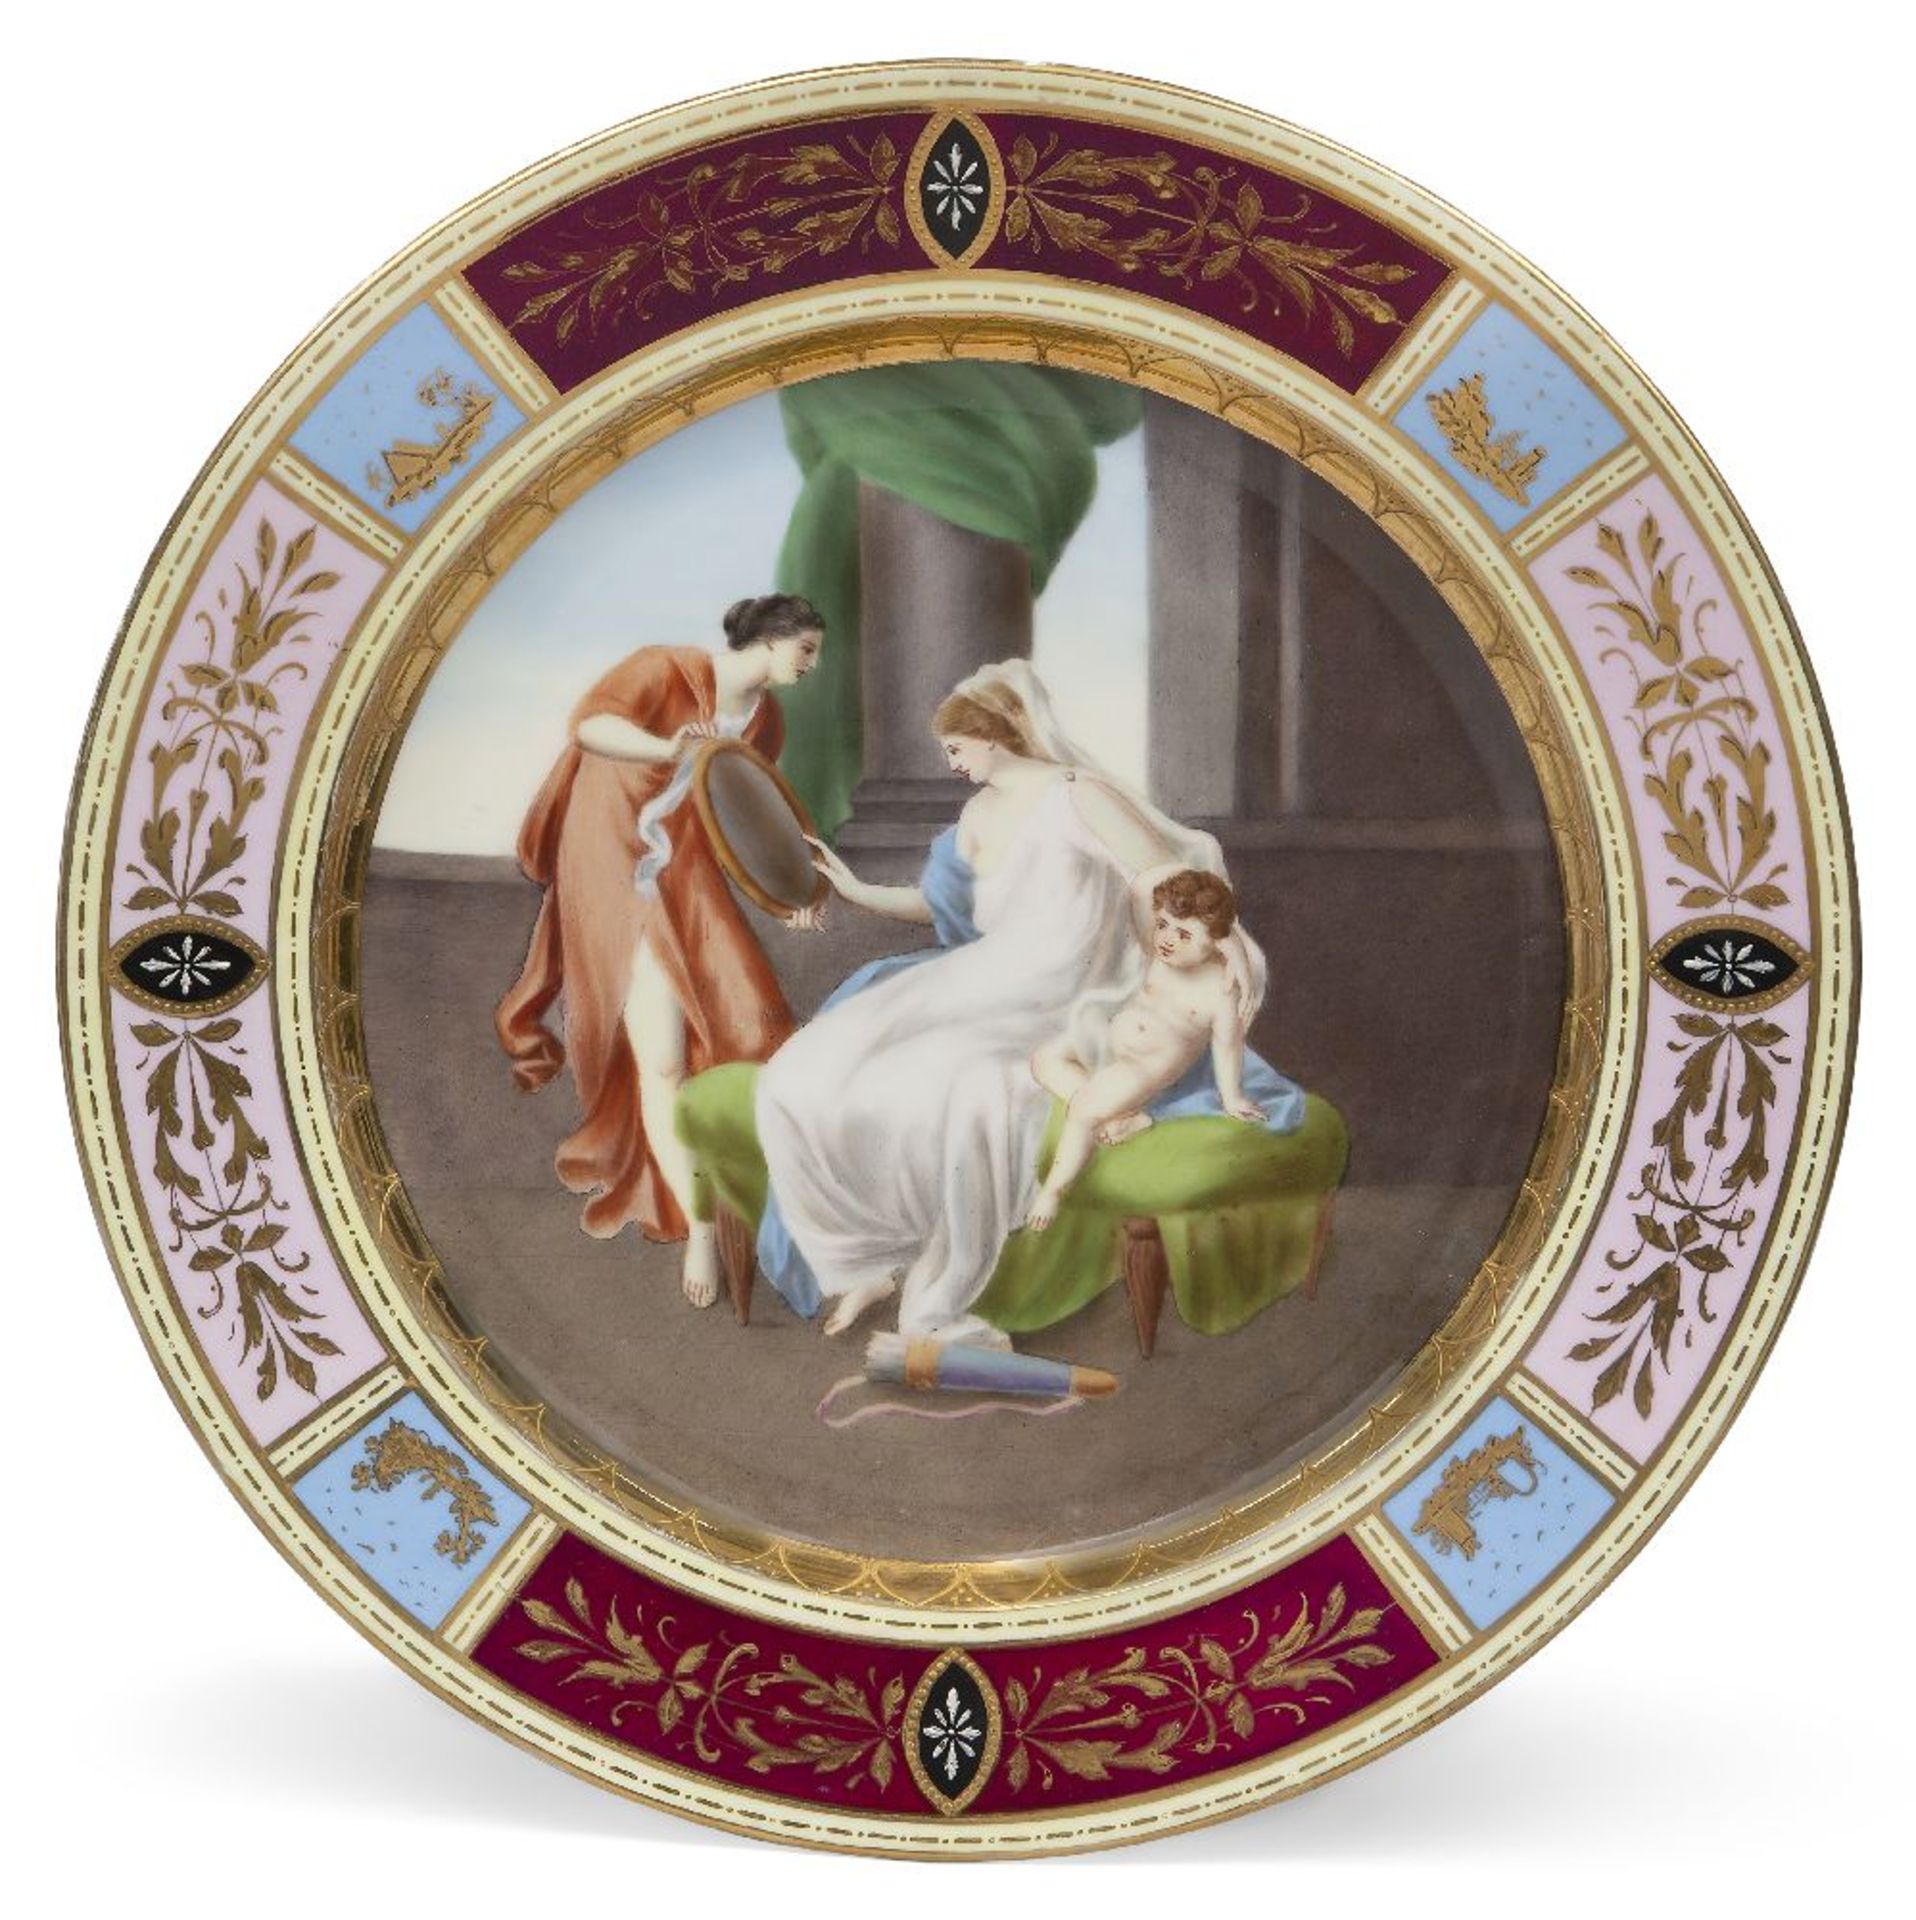 A large Vienna-style porcelain cabinet plate, 20th century, blue beehive mark and title Toilette der